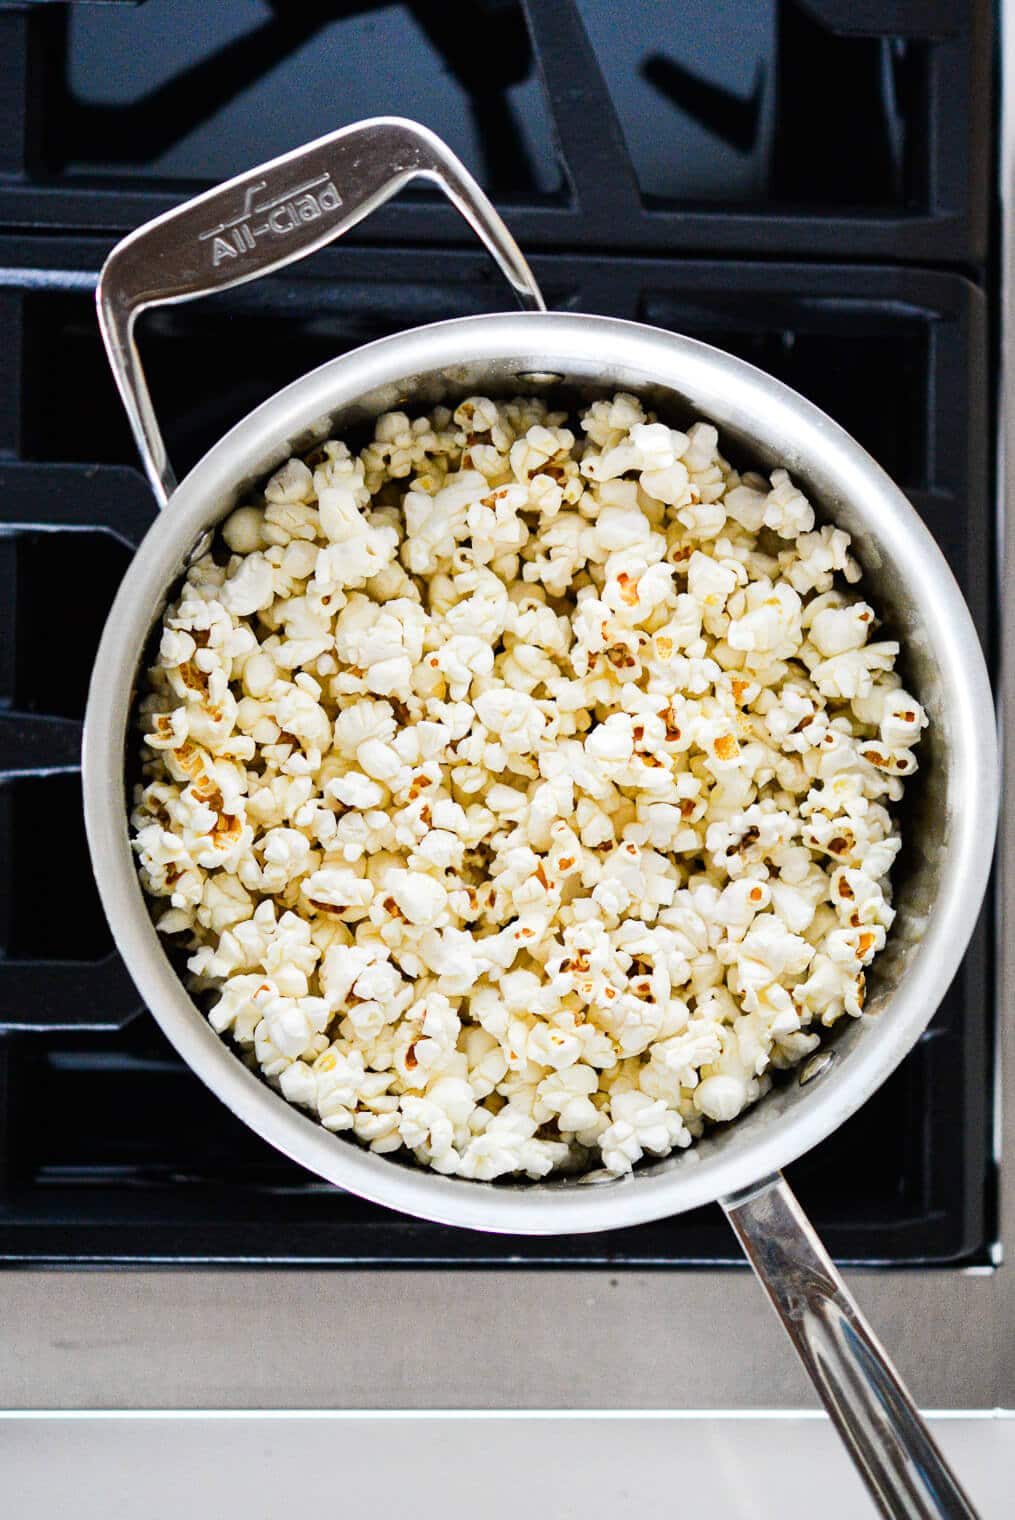 Stainless steel pot with popped corn sitting on stove top